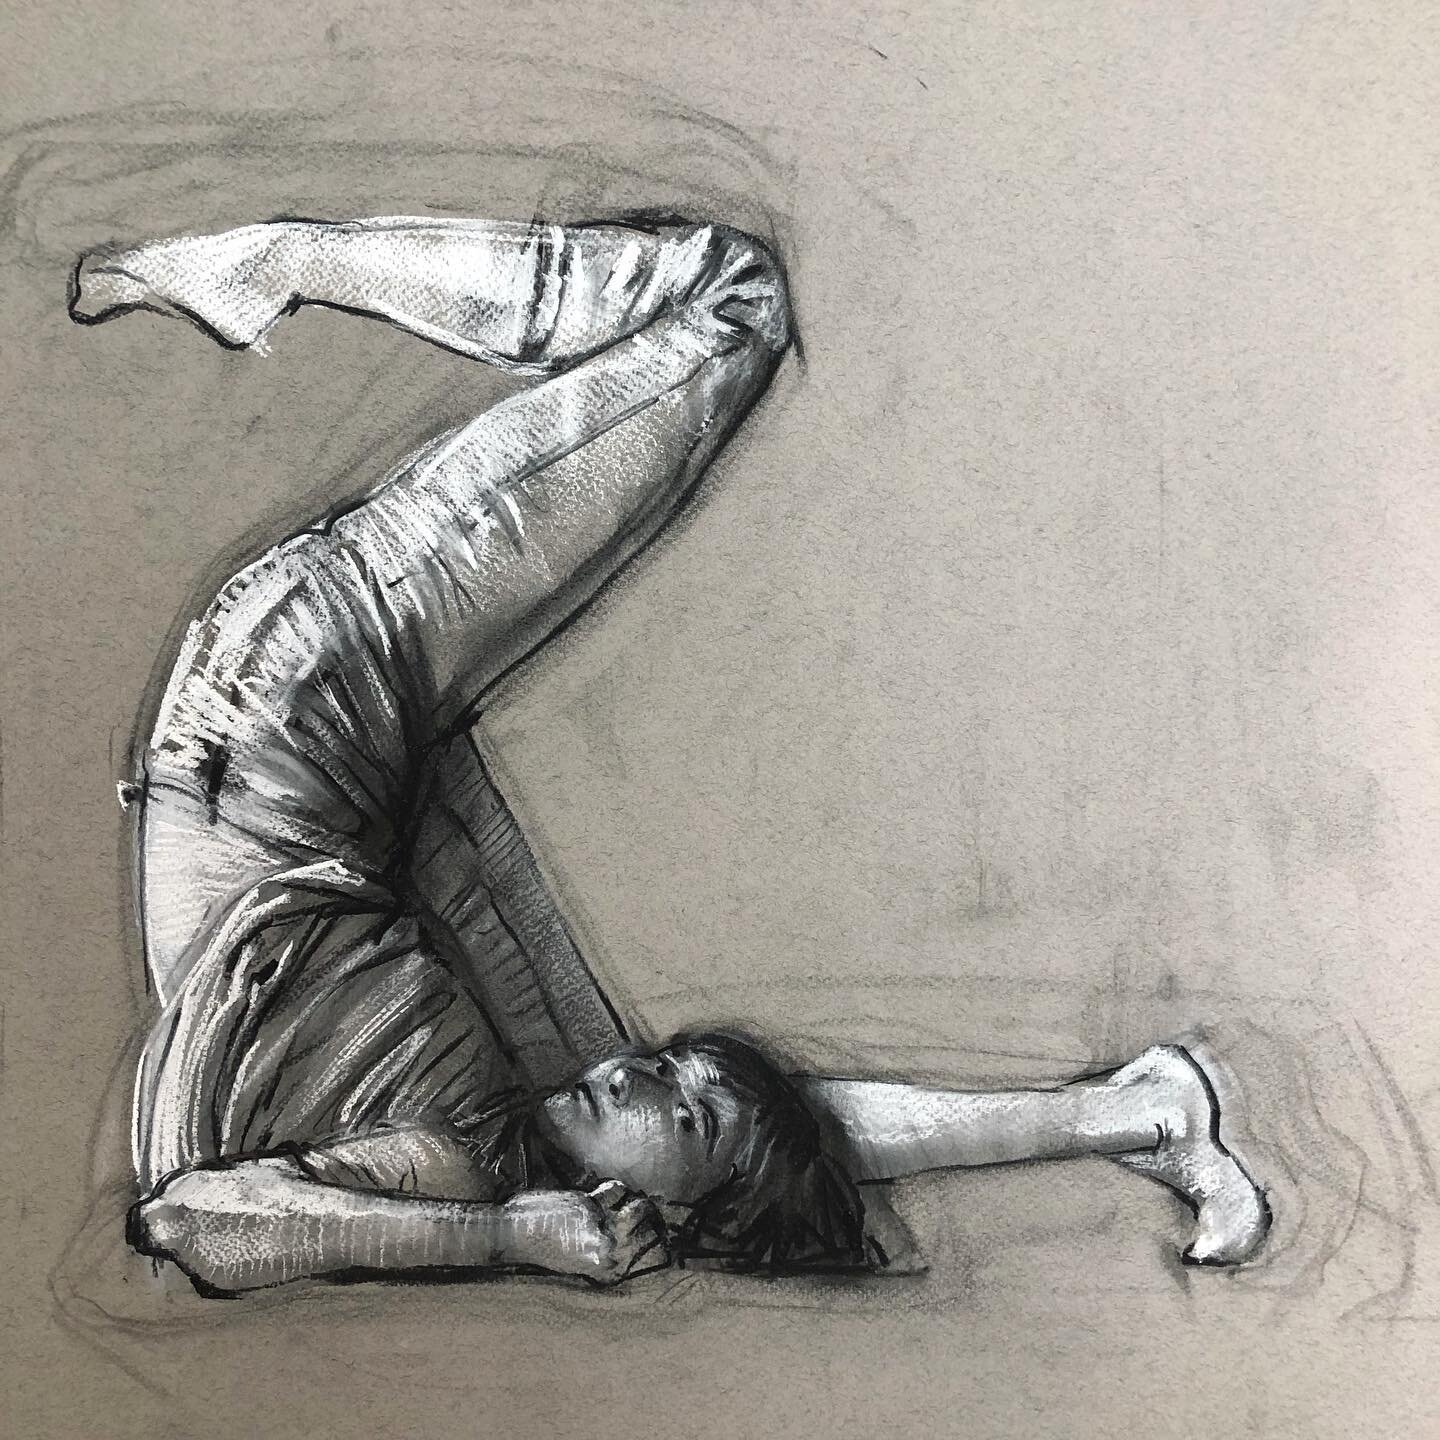 Charcoal and conte on grey paper. The gesture of the pose usually starts out large and then shrinks down through the drawing process. I like to think this process is similar to how a sculptor would approach clay or stone - carving and chiseling away 